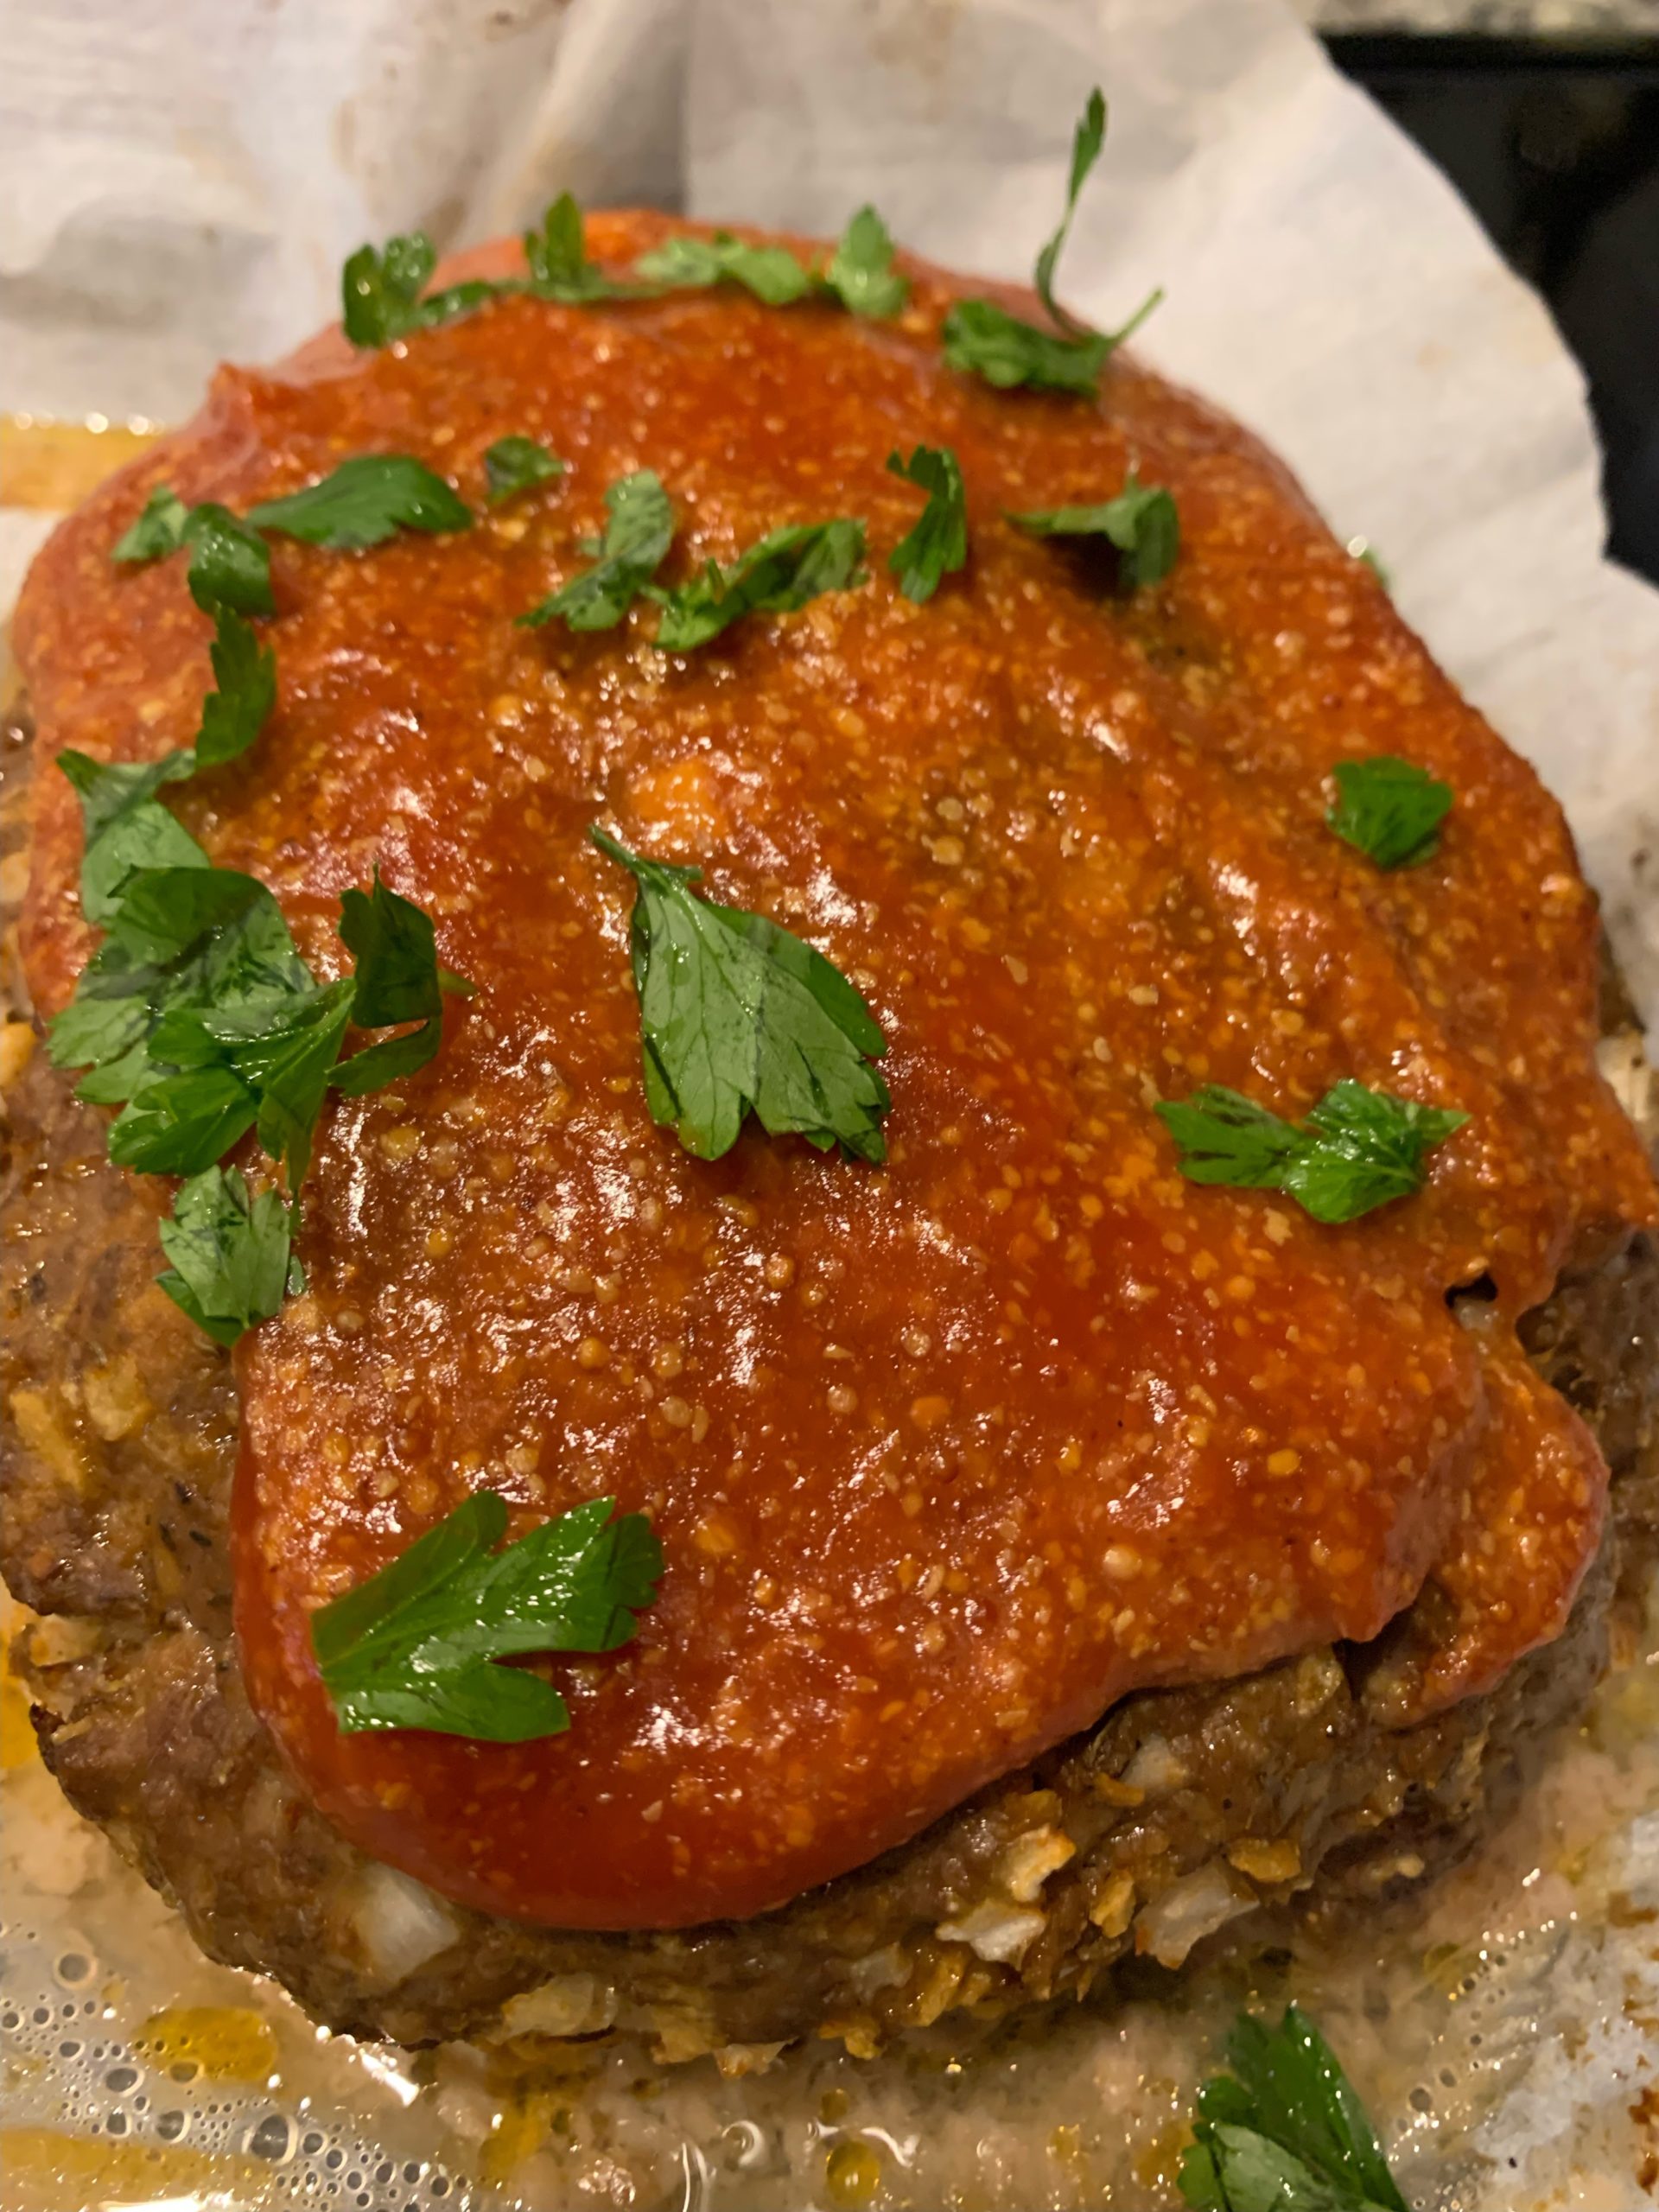 Freezer Meal Meat Loaf Recipe - One Hundred Dollars a Month